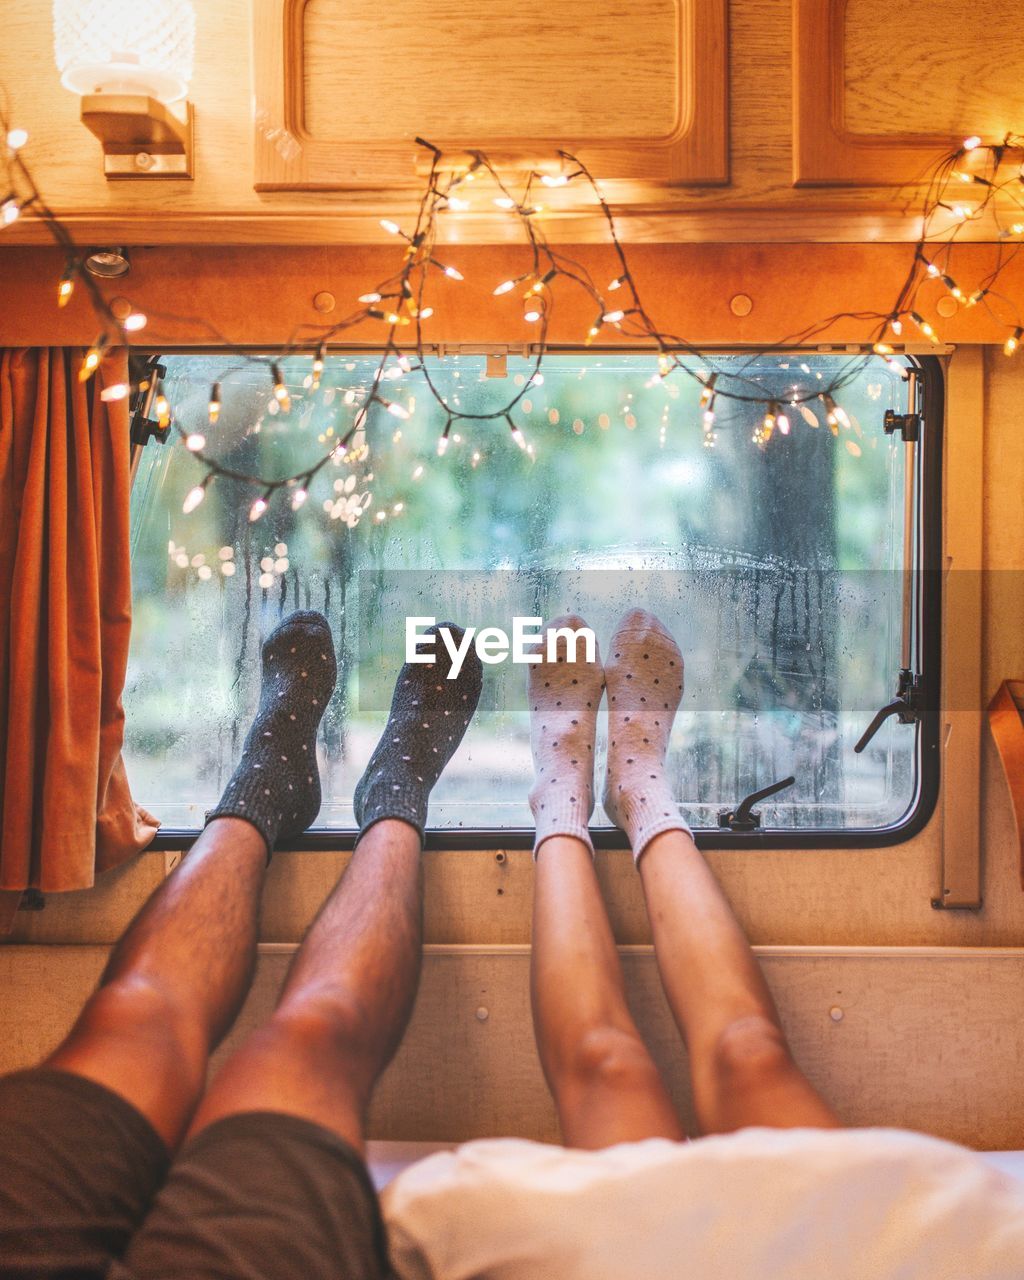 Low section of couple relaxing in motor home